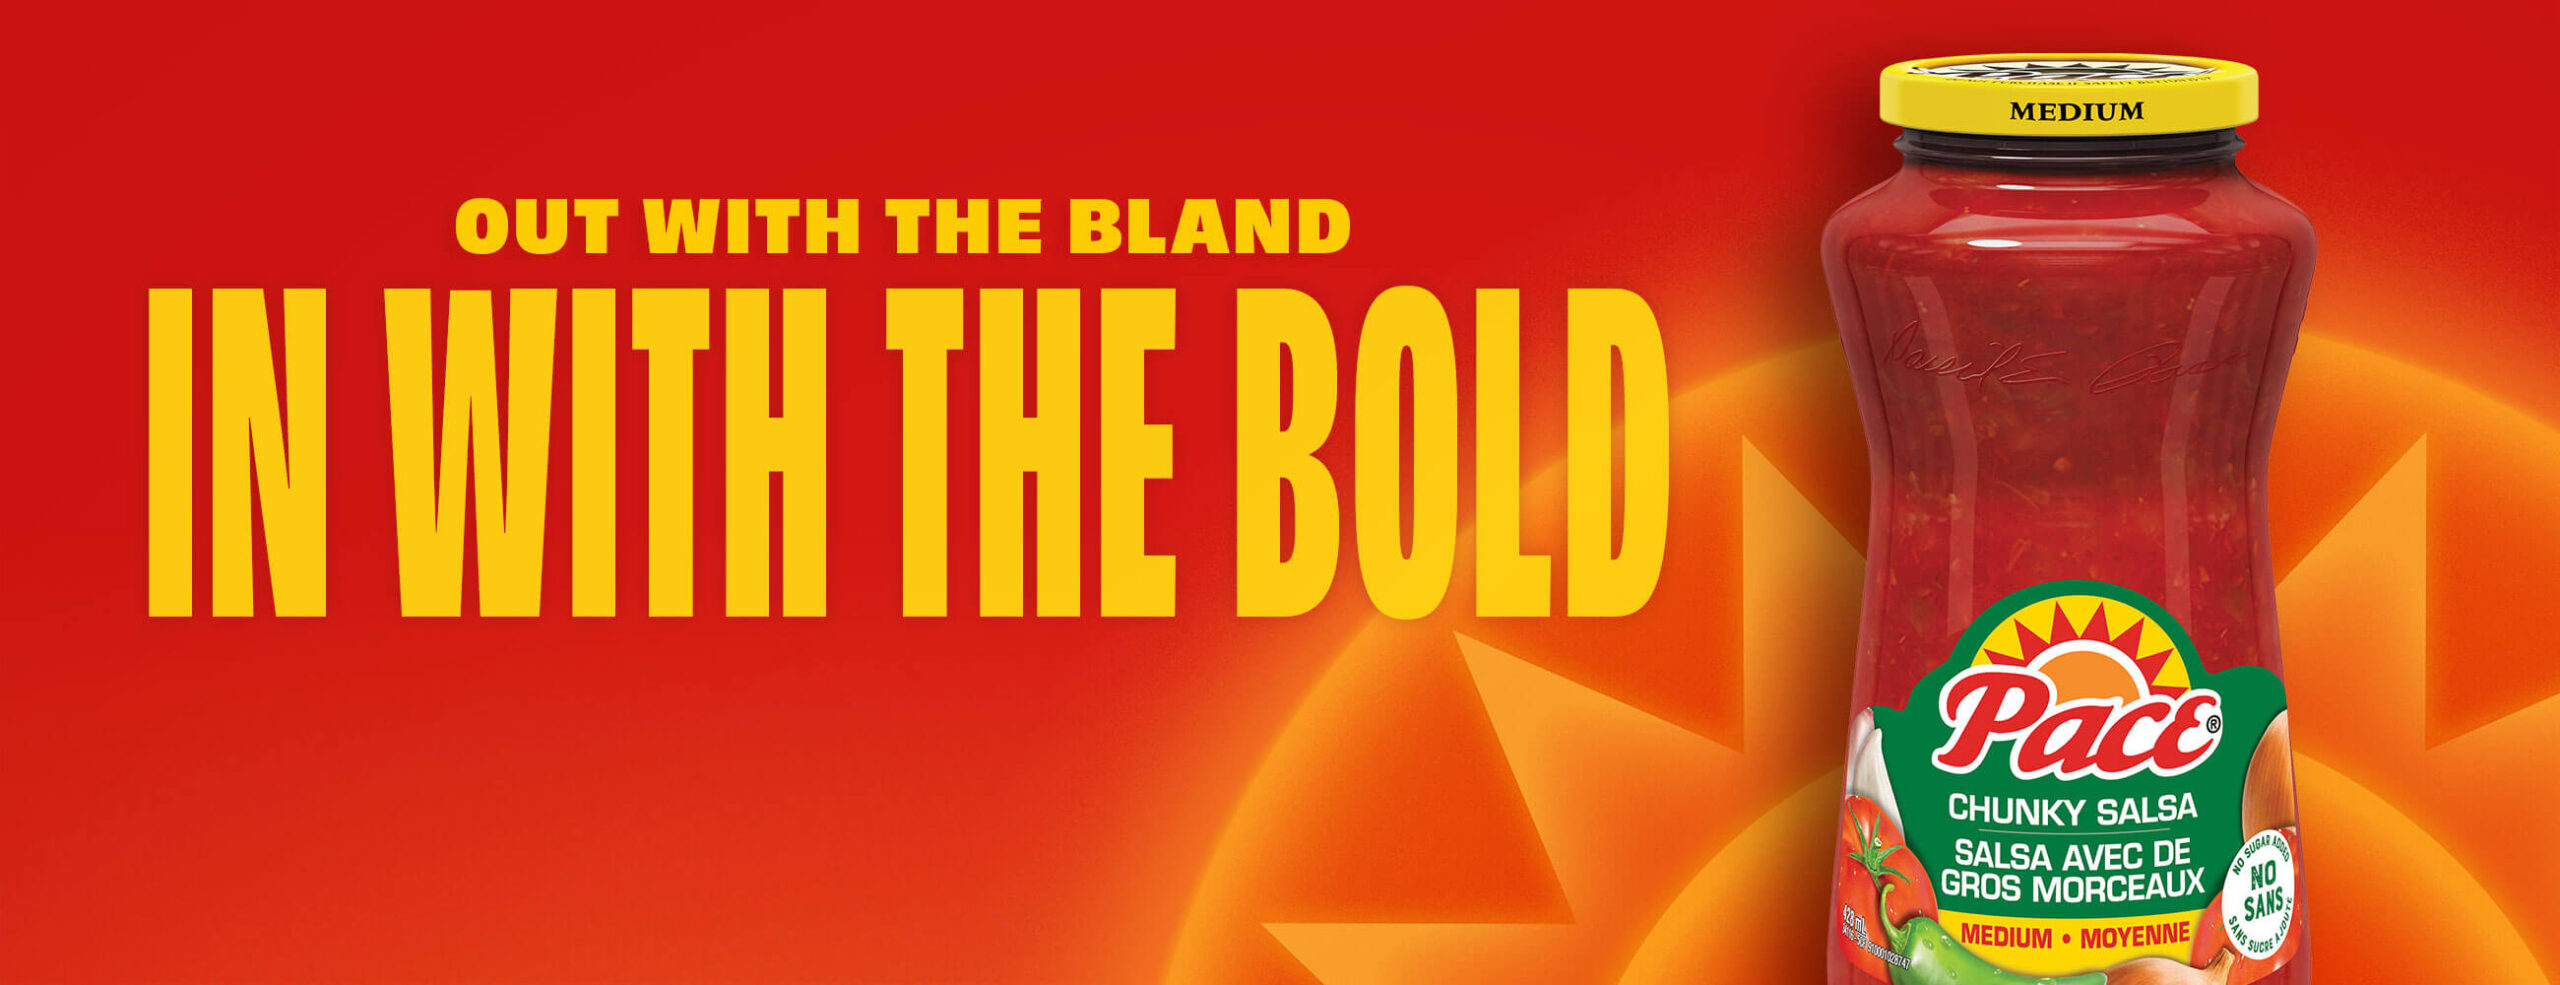 Pace Salsa® Out with the bland in with the bold.